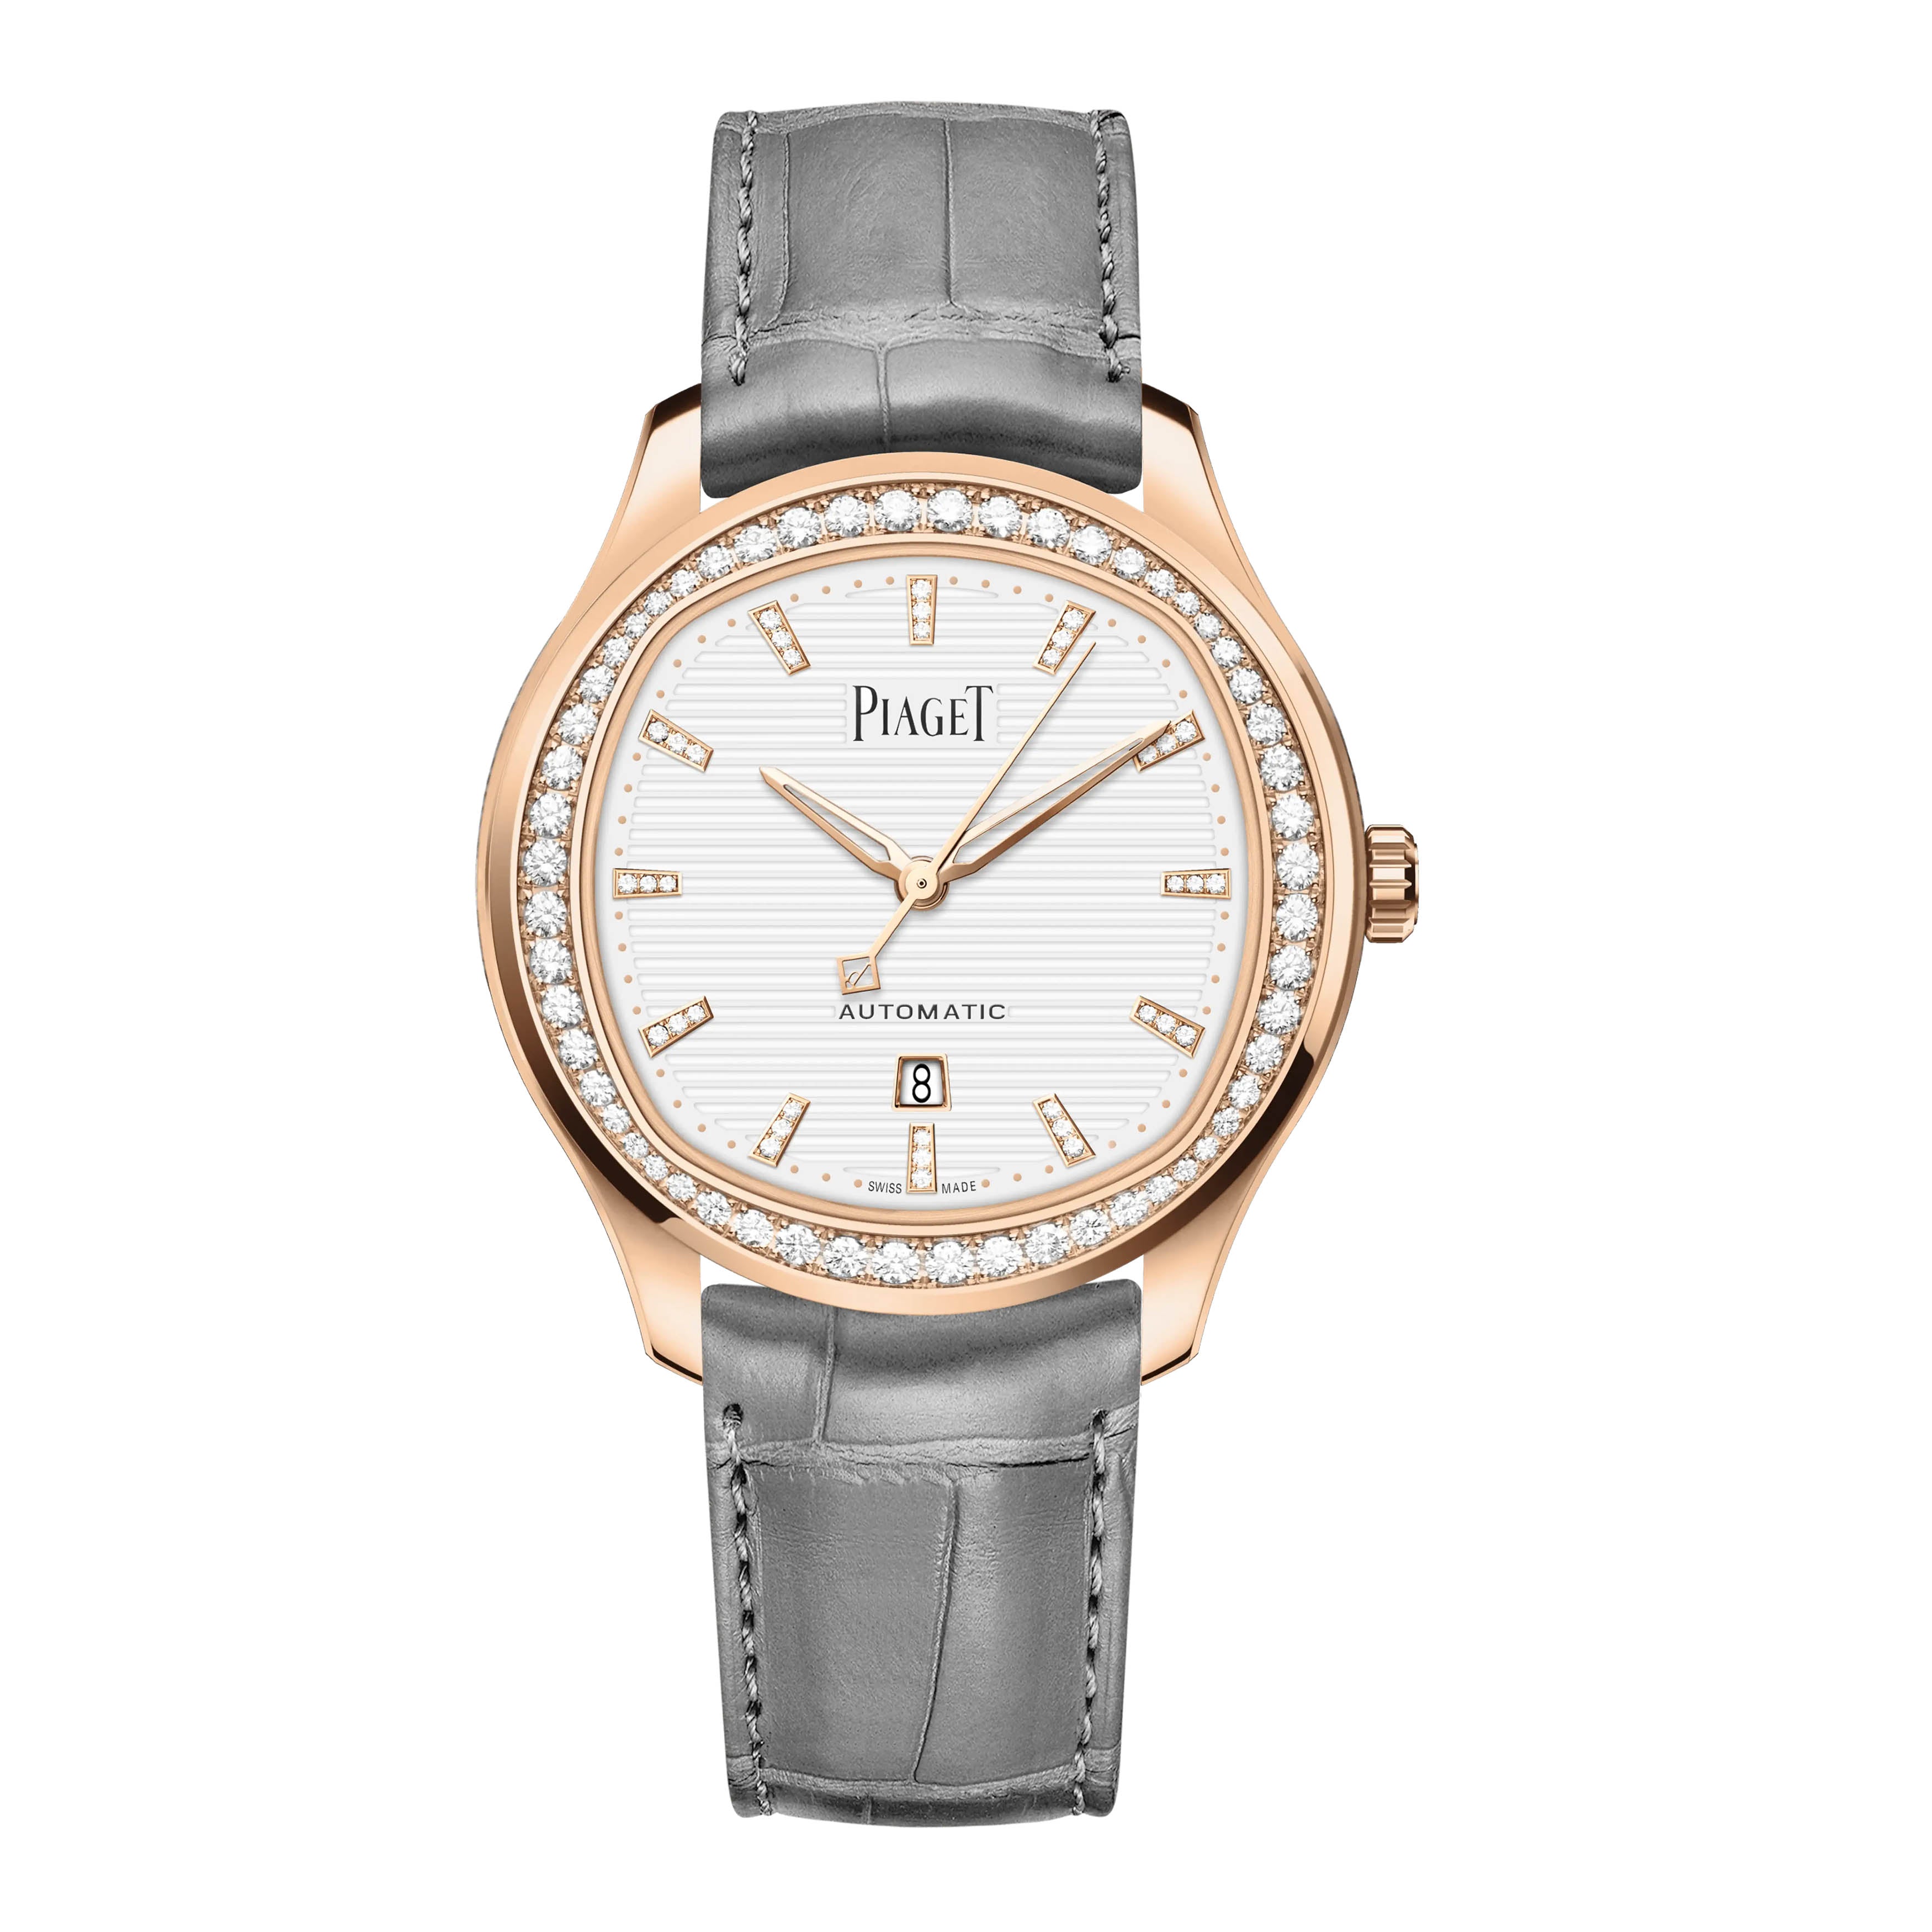 Piaget Polo Date Watch, 36mm White Dial, G0A46023